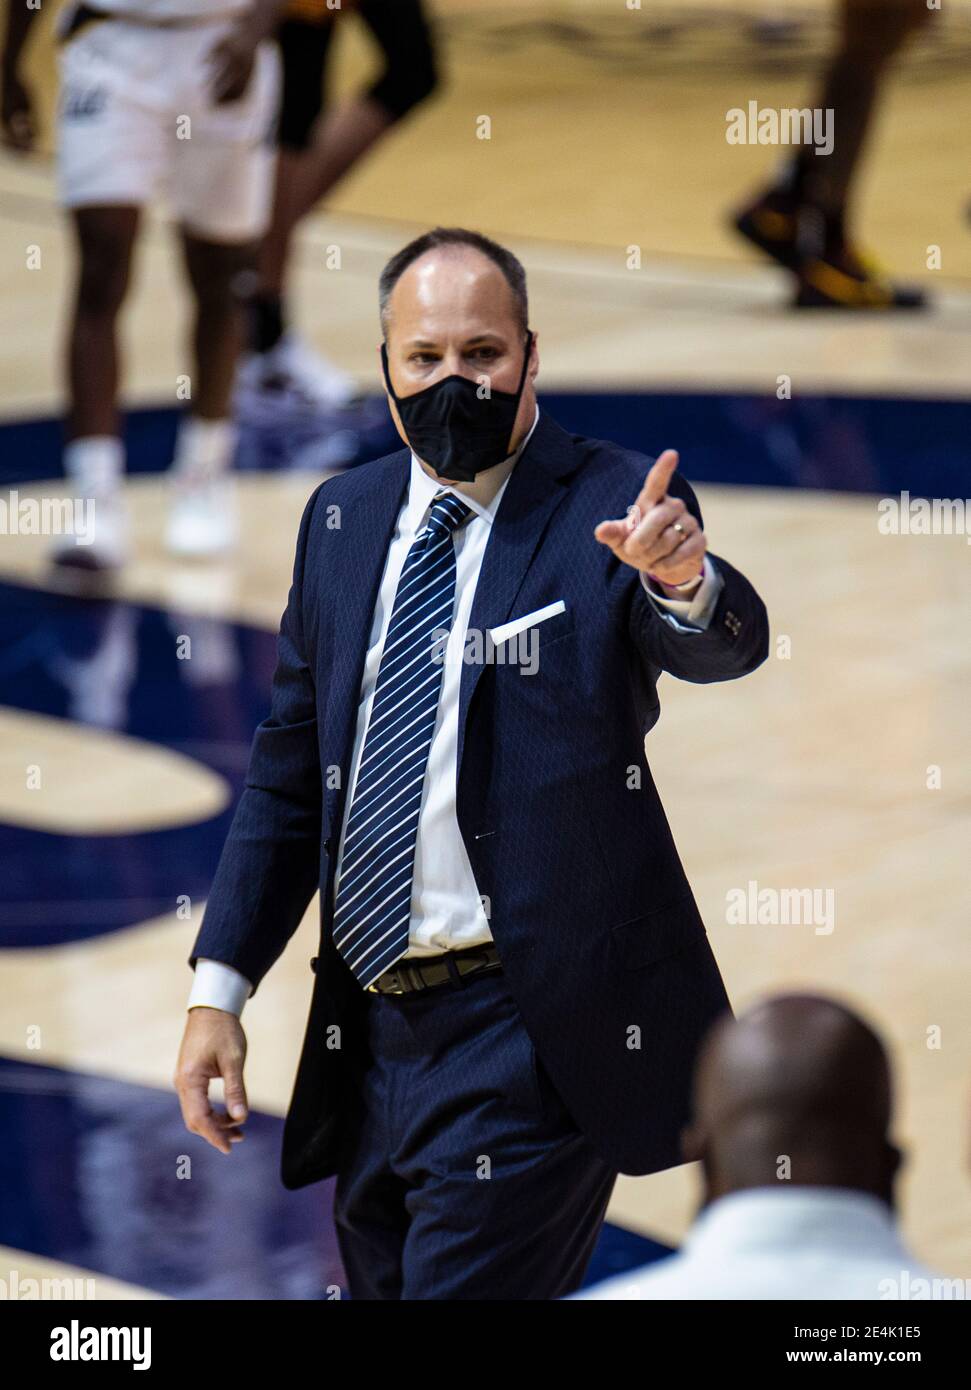 Hass Pavilion. 23rd Jan, 2021. CA U.S.A. California head coach Mark Fox on the sideline during the NCAA Basketball game between USC Trojans and the California Golden Bears 68-76 lost at Hass Pavilion. Thurman James/CSM/Alamy Live News Stock Photo